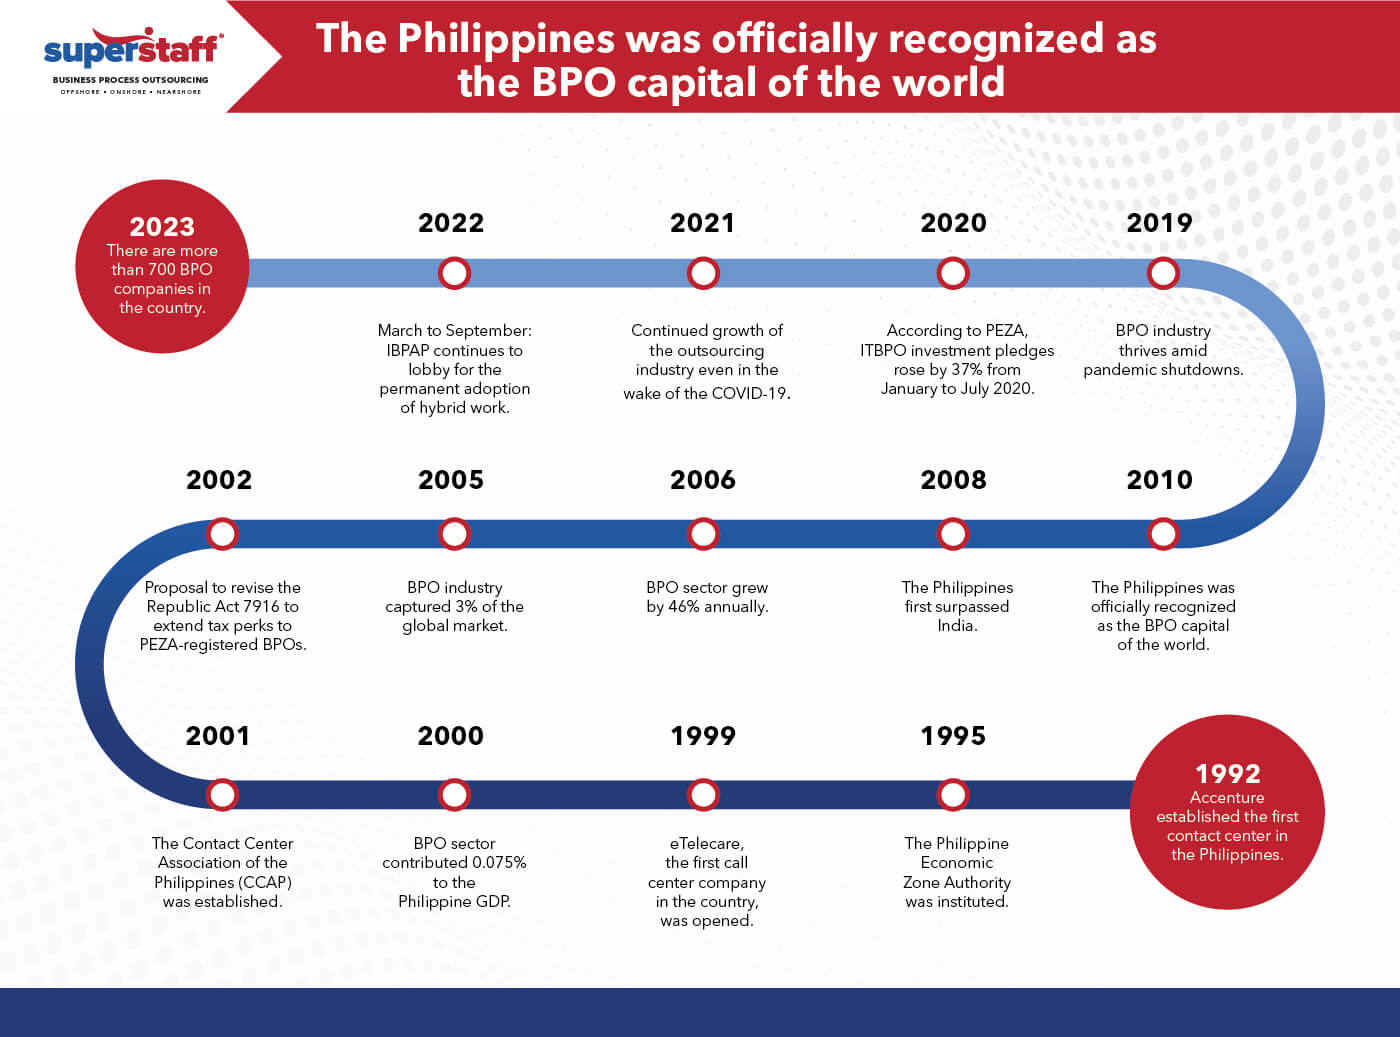 A chart shows the brief timeline of the BPO industry in the Philippines.